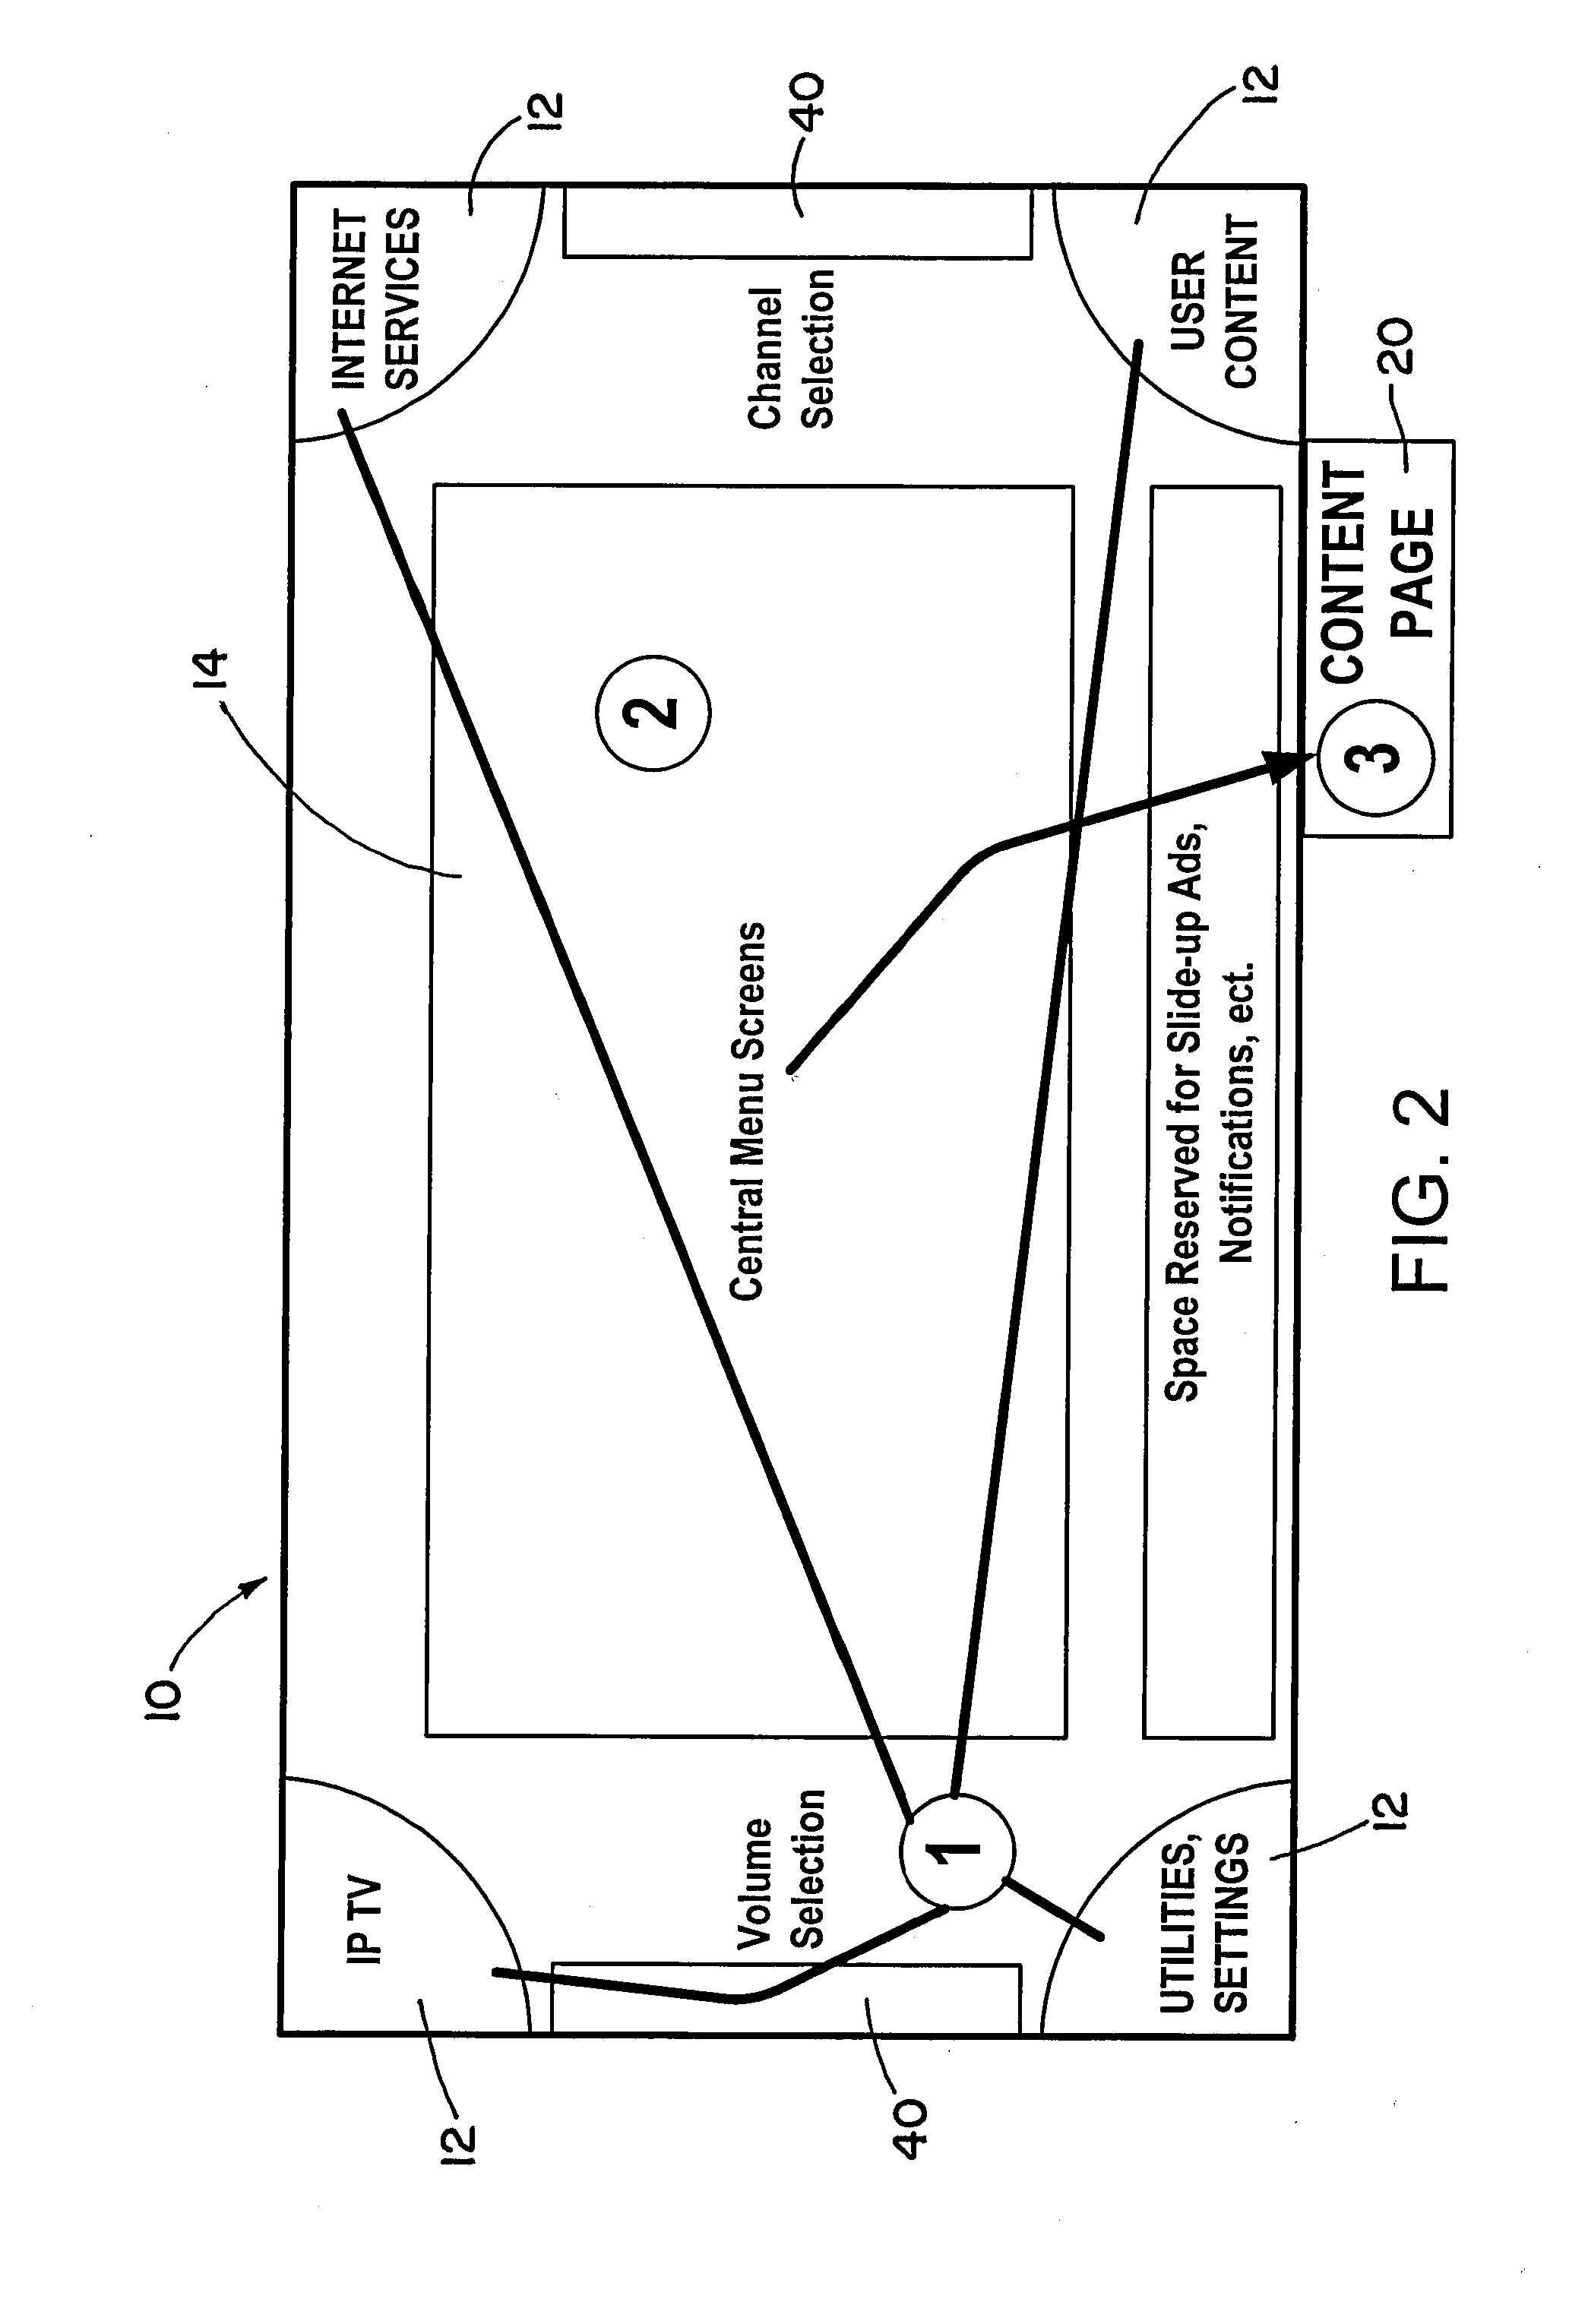 User control interface for interactive digital television